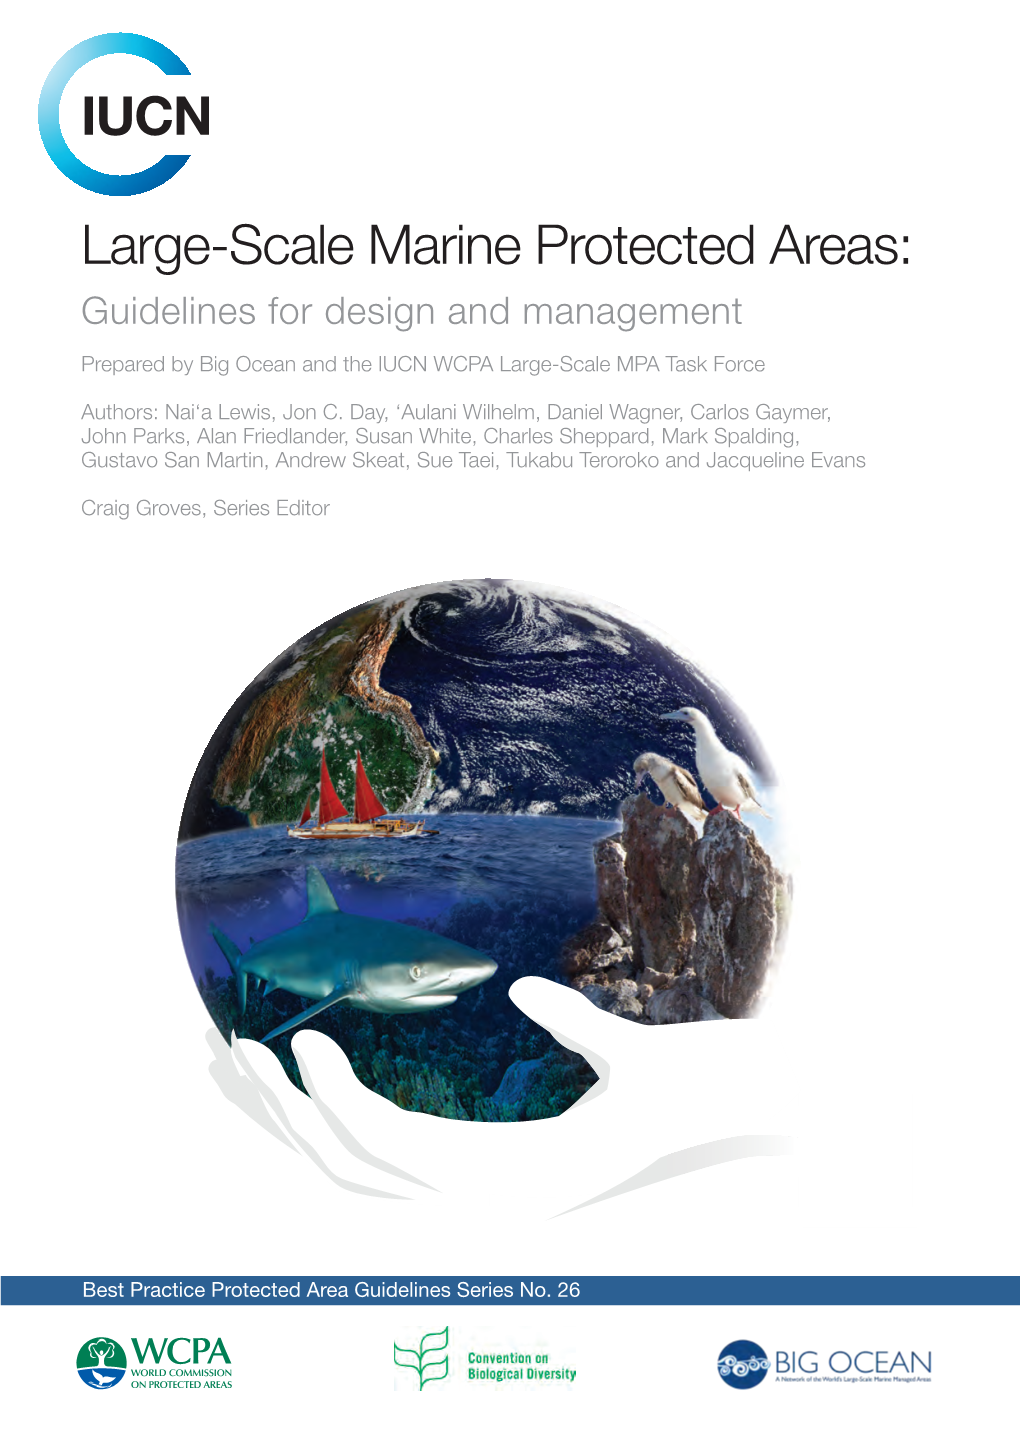 Large-Scale Marine Protected Areas: Guidelines for Design and Management